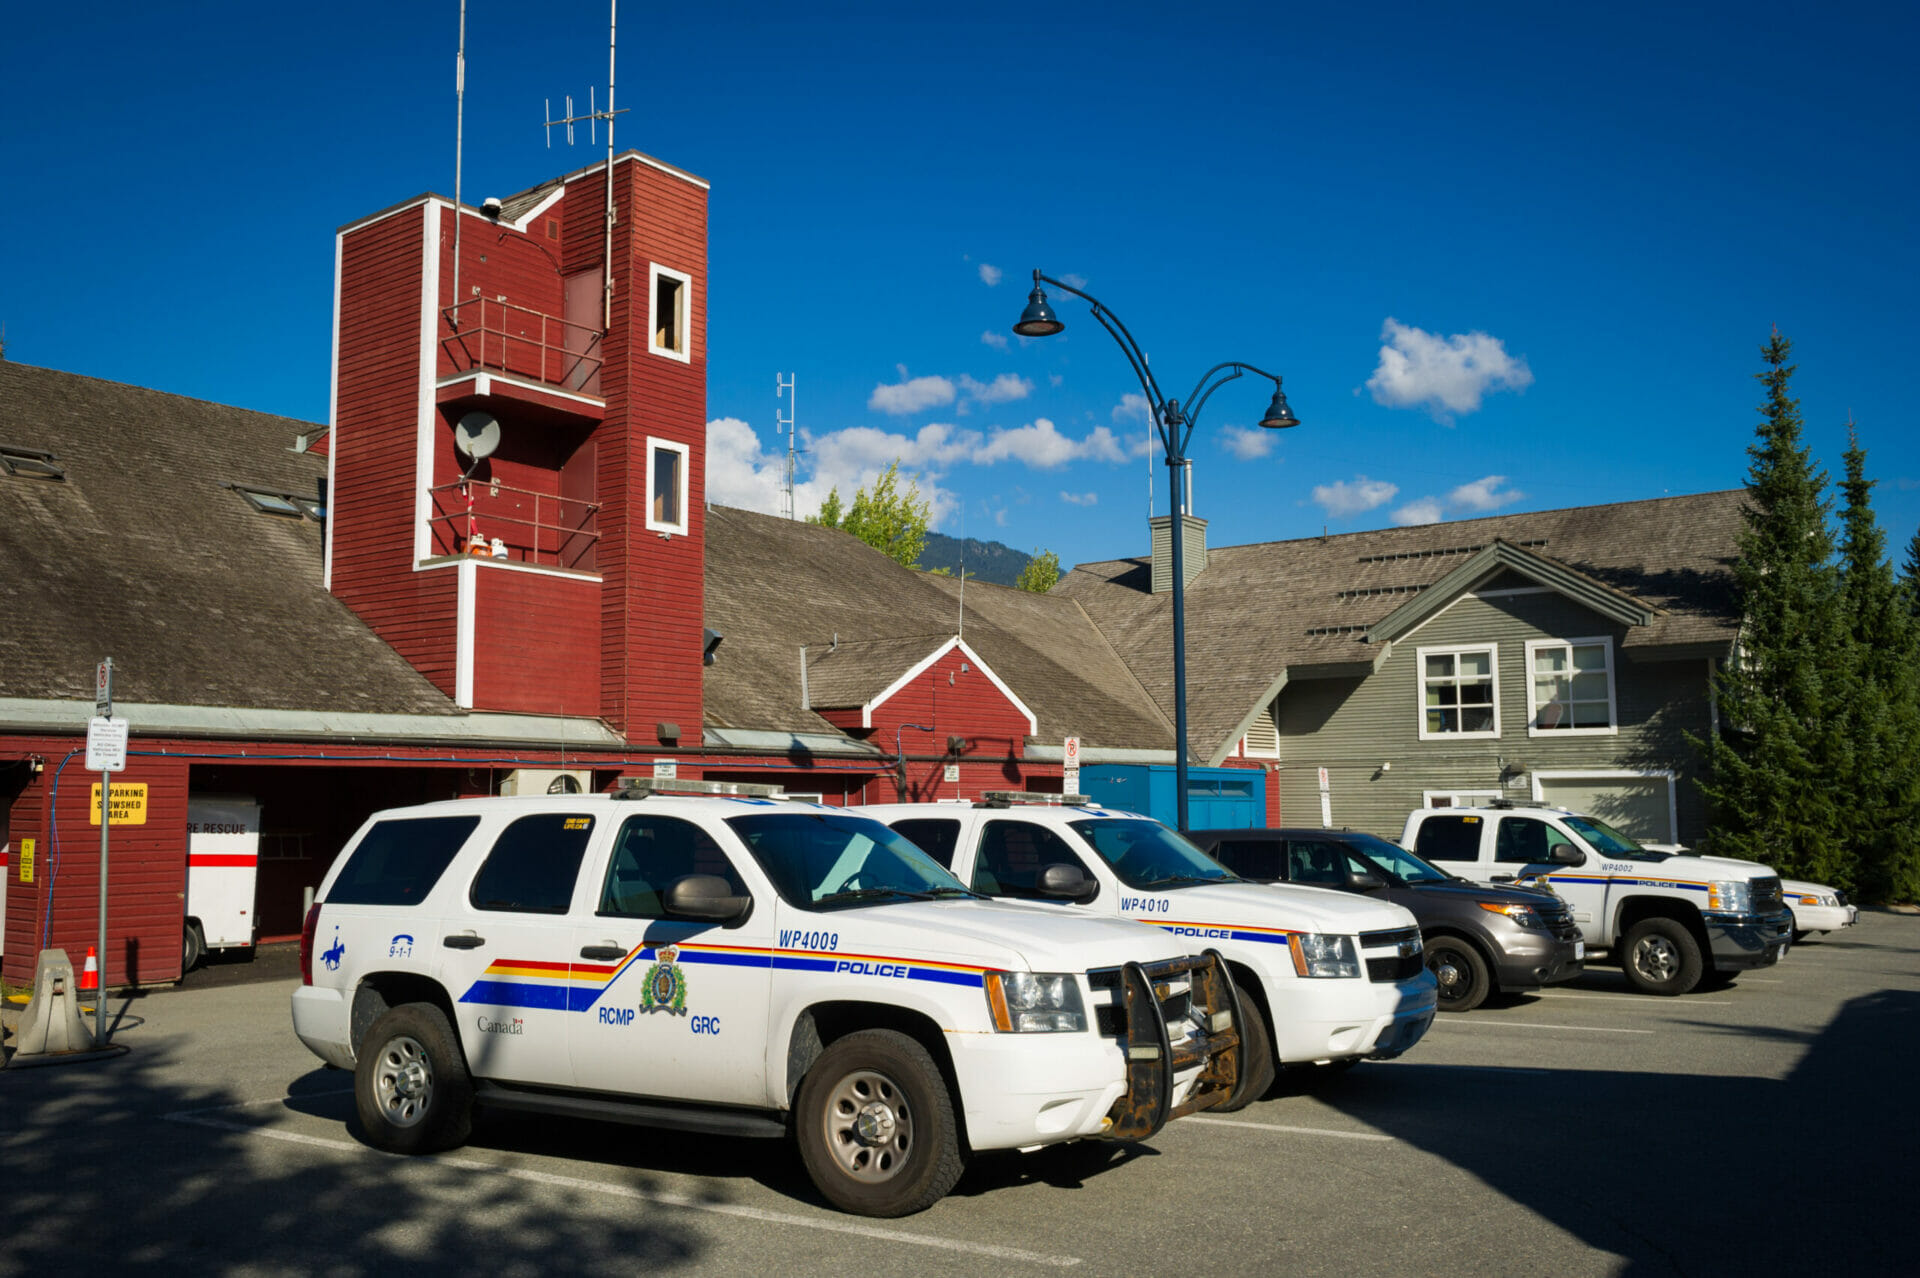 RCMP vehicles outside the public safety building